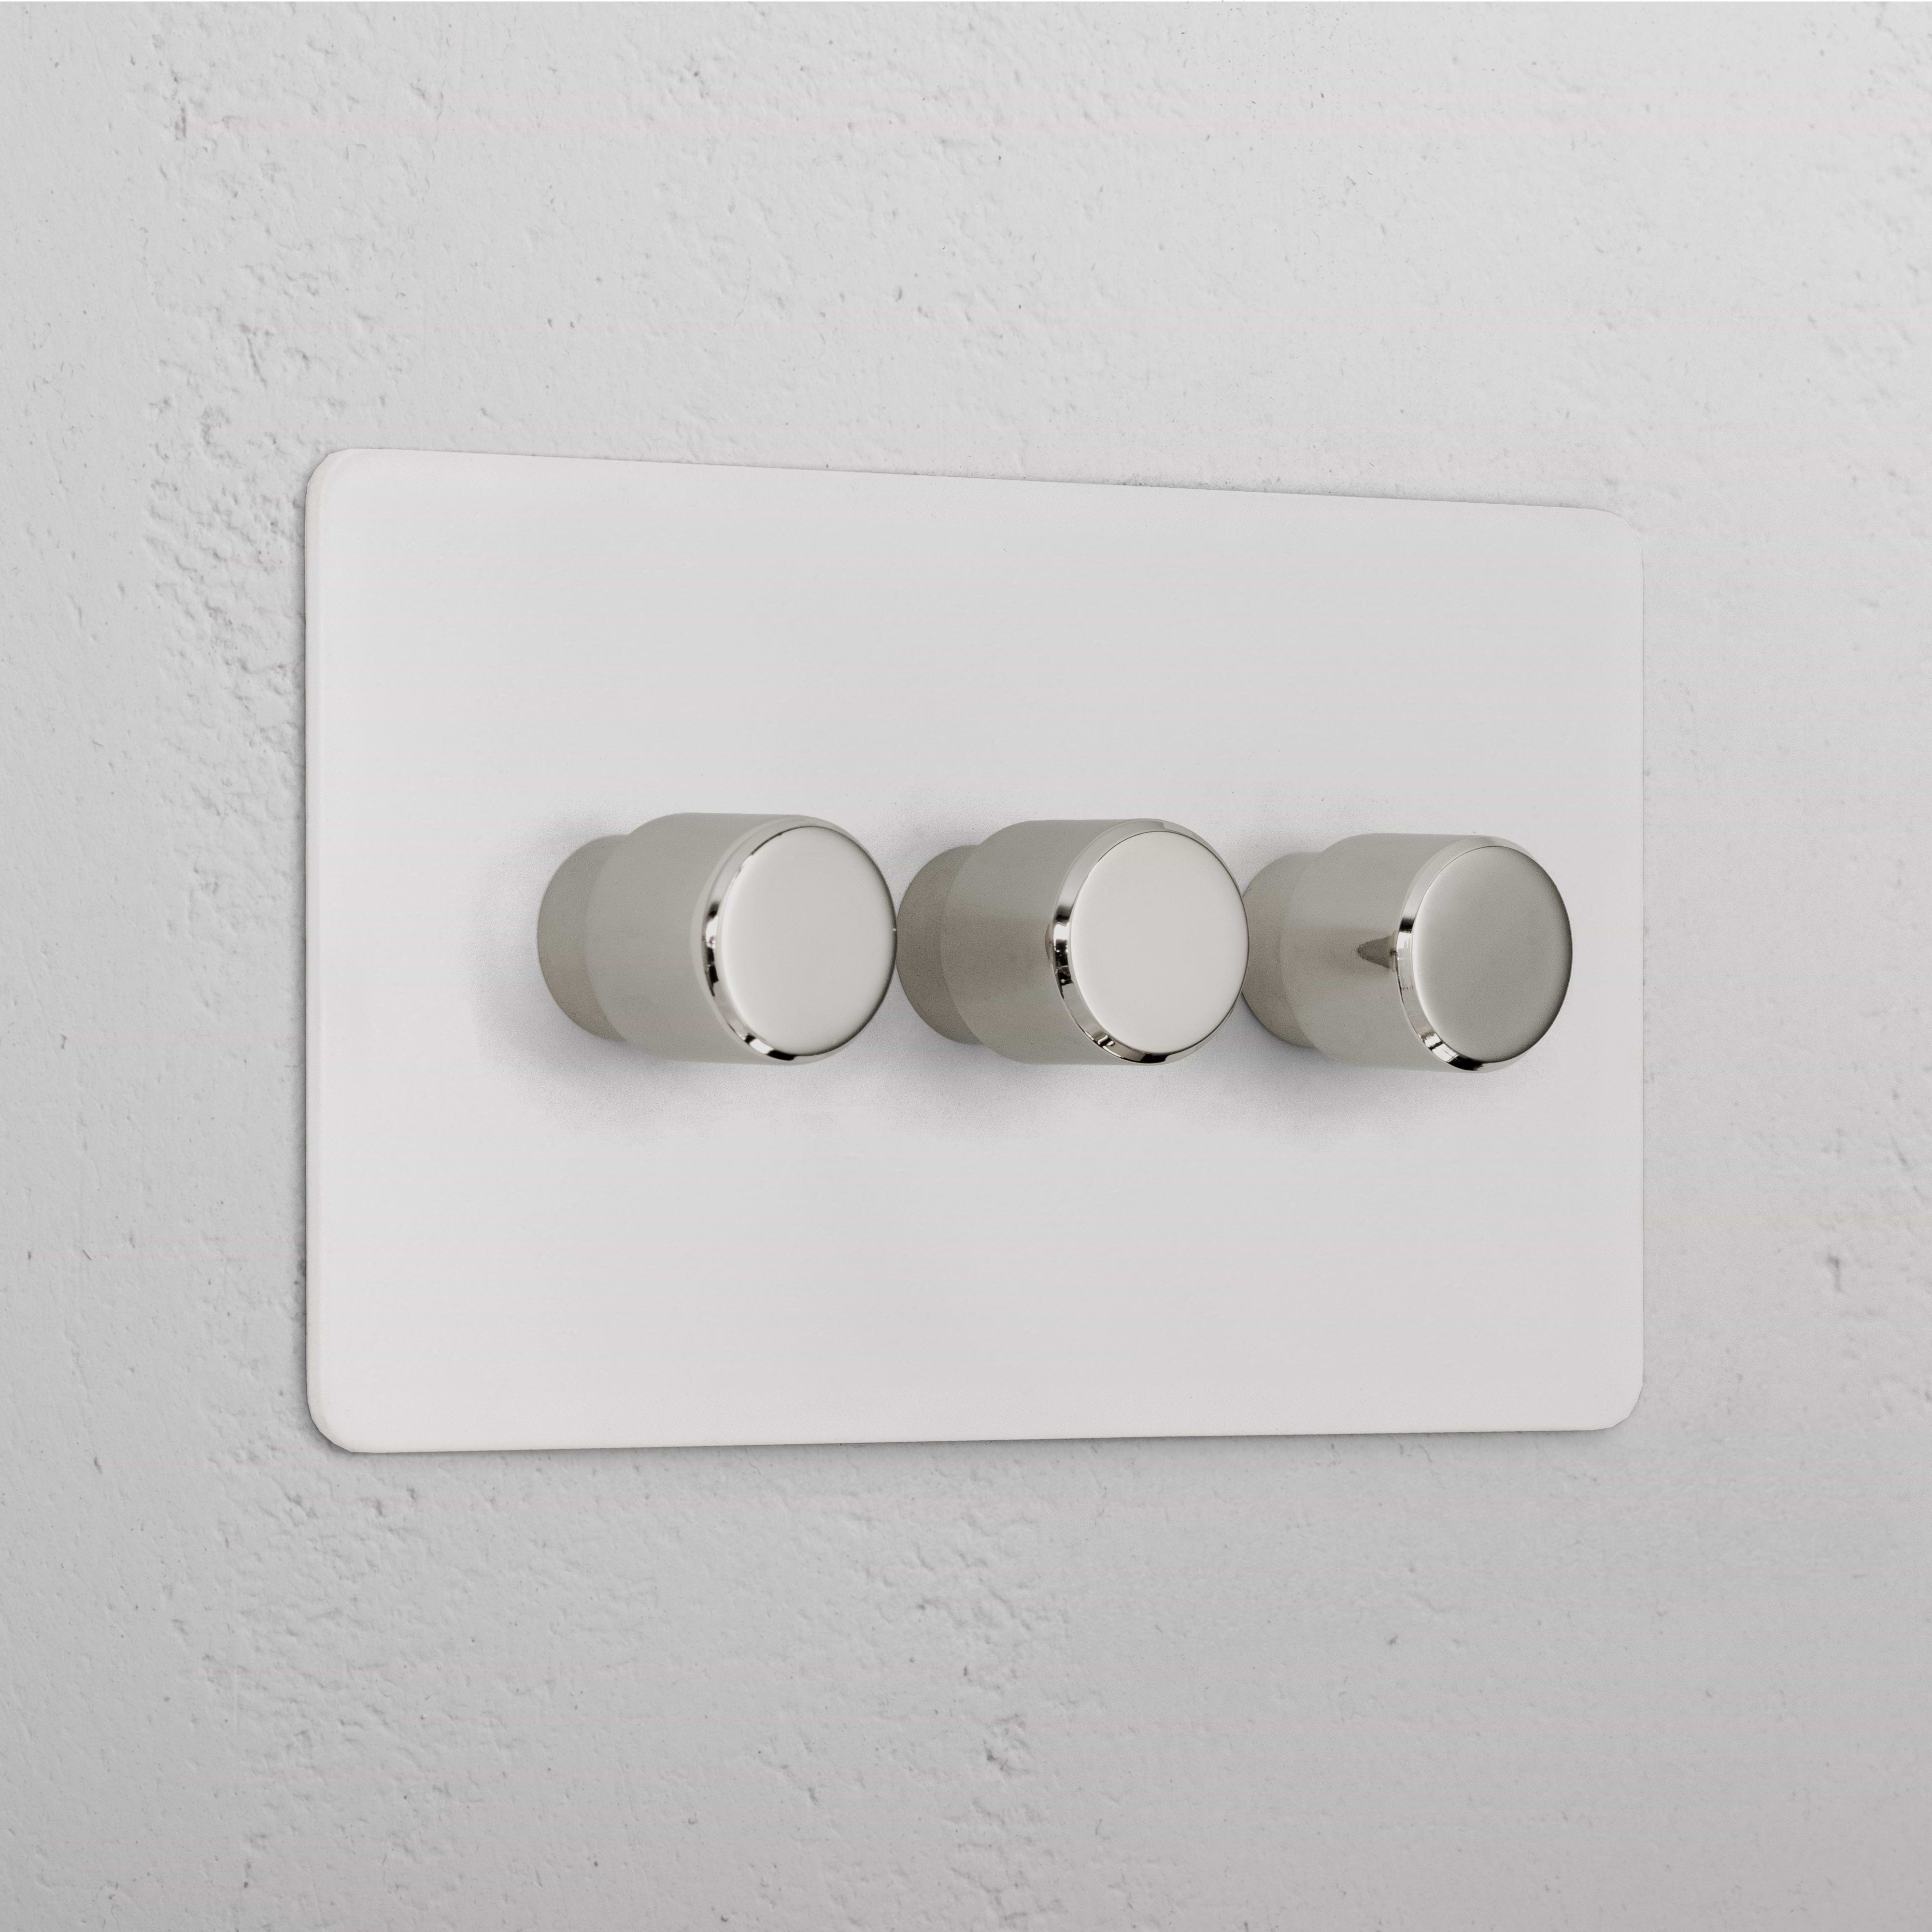 3G Dimmer Switch - Paintable Polished Nickel